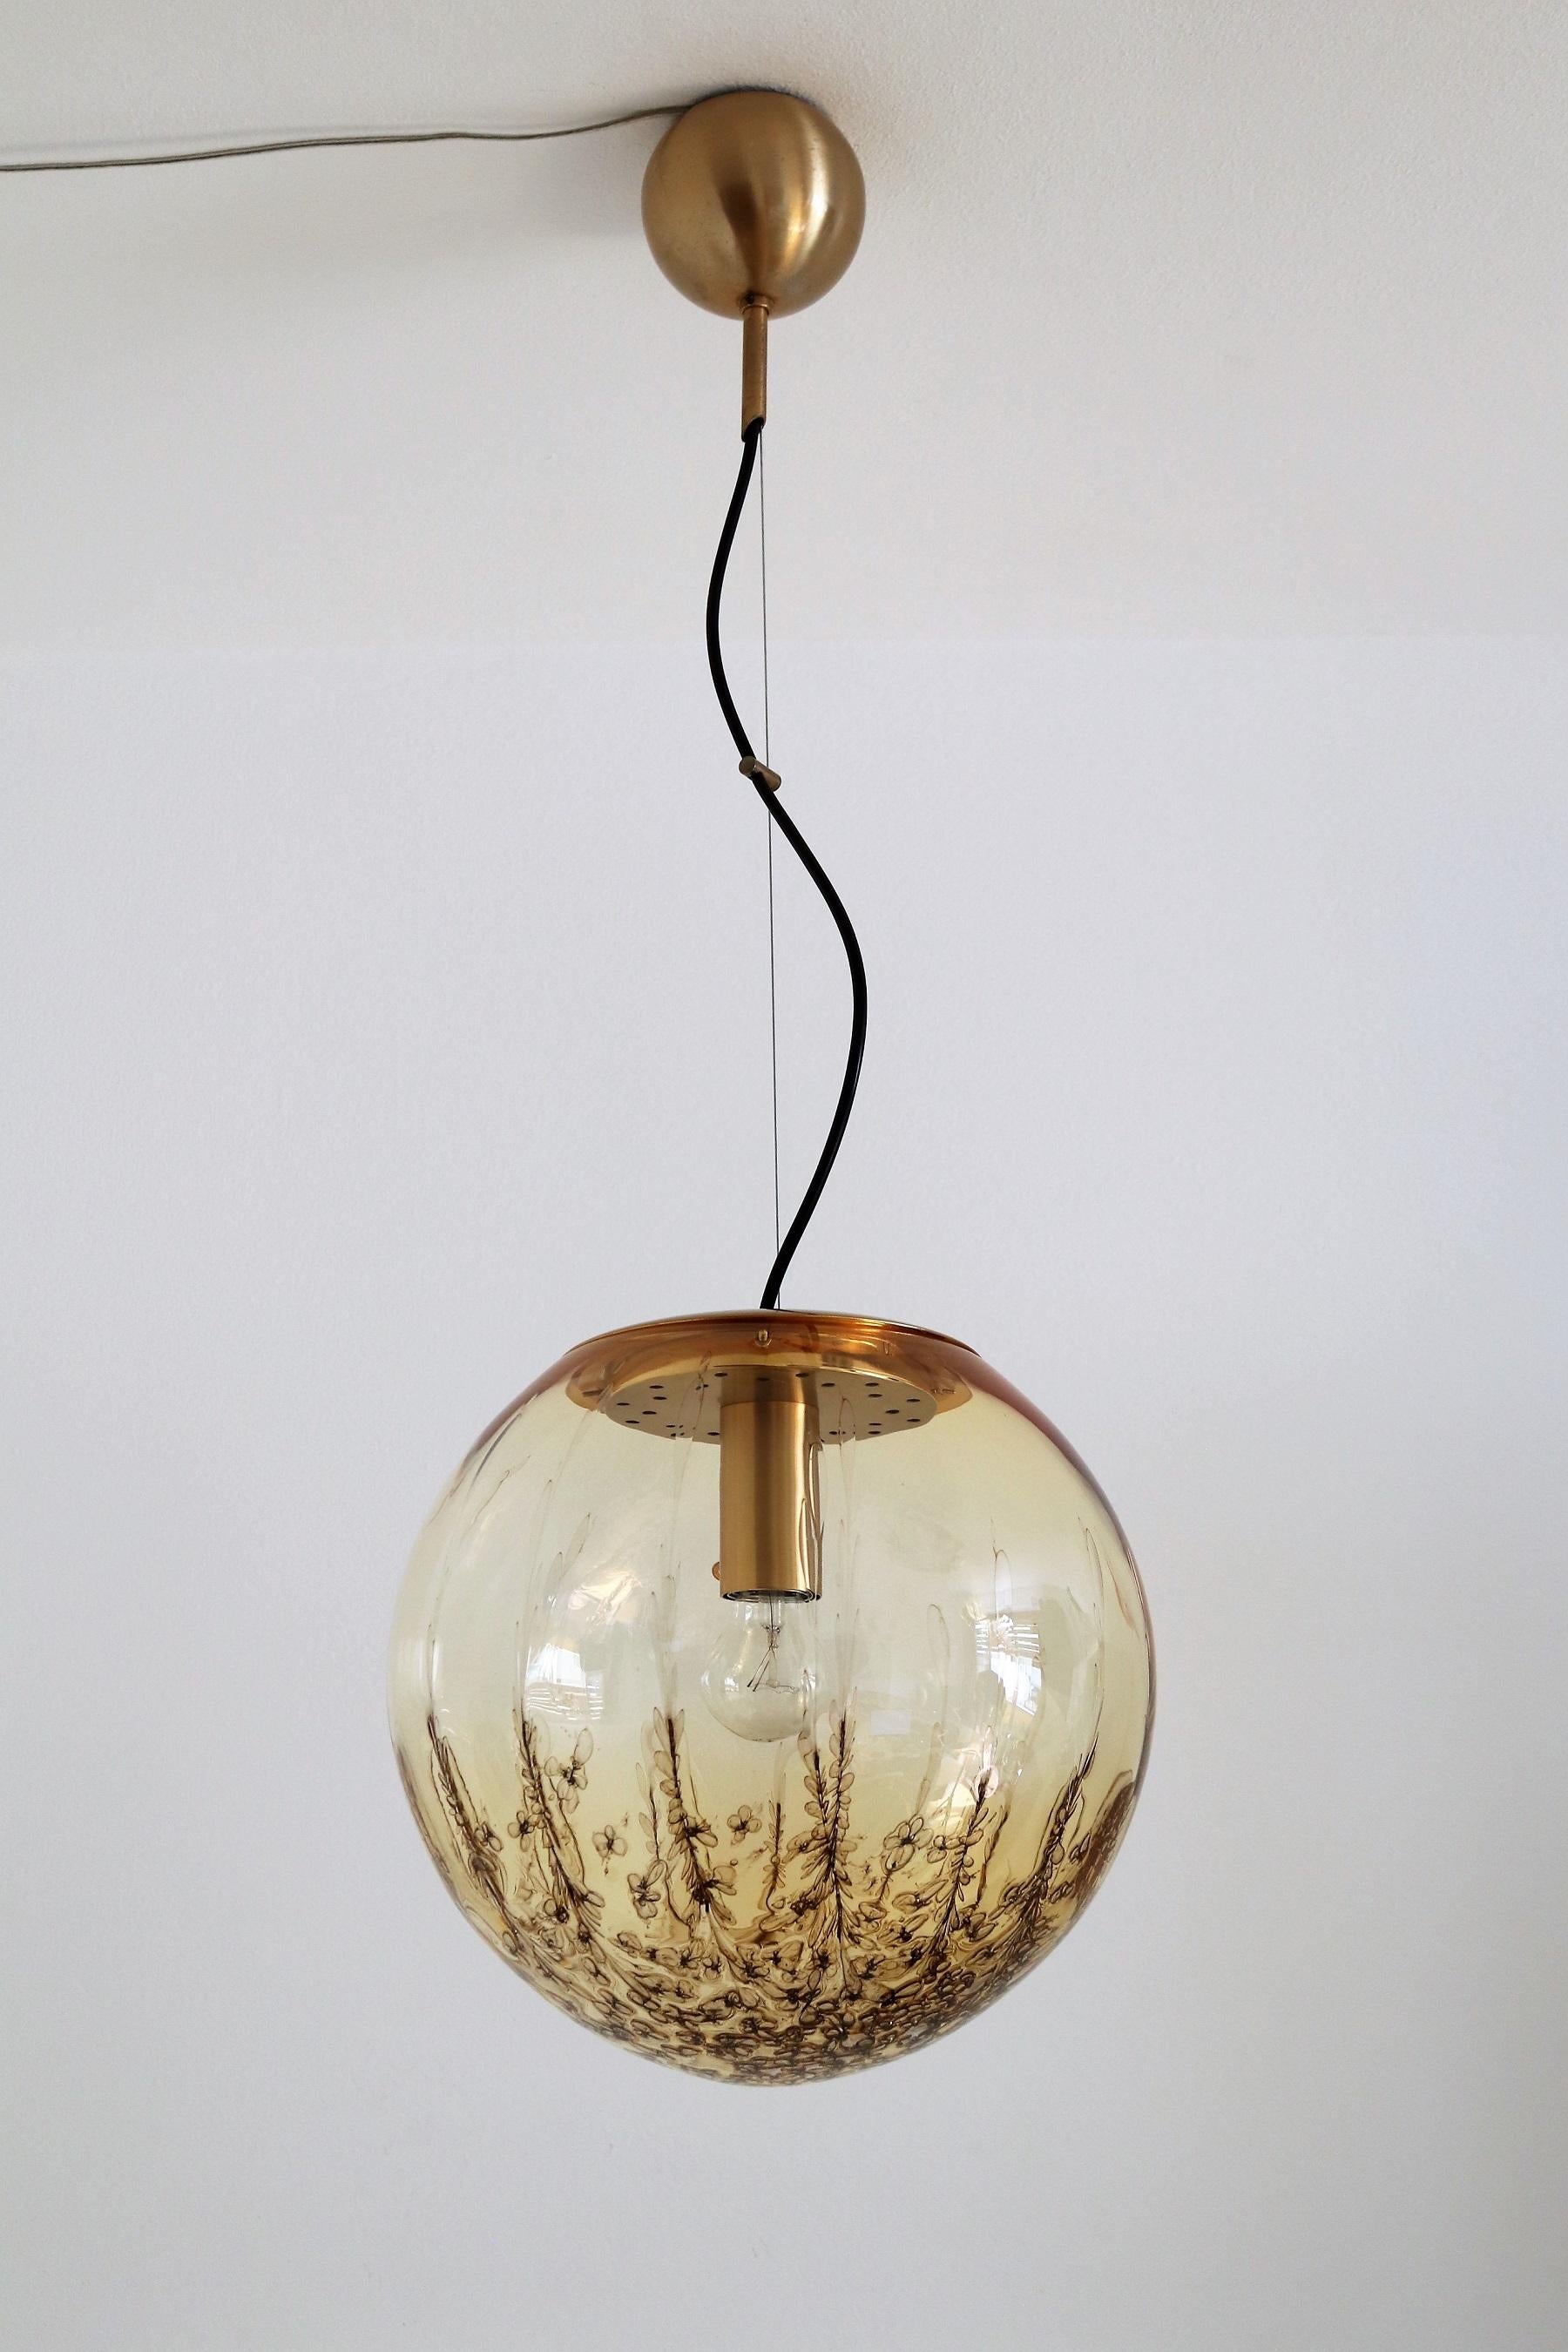 Gorgeous Murano glass sphere pendant lamp made in Murano by La Murrina, 1970s.
Signed with their original 